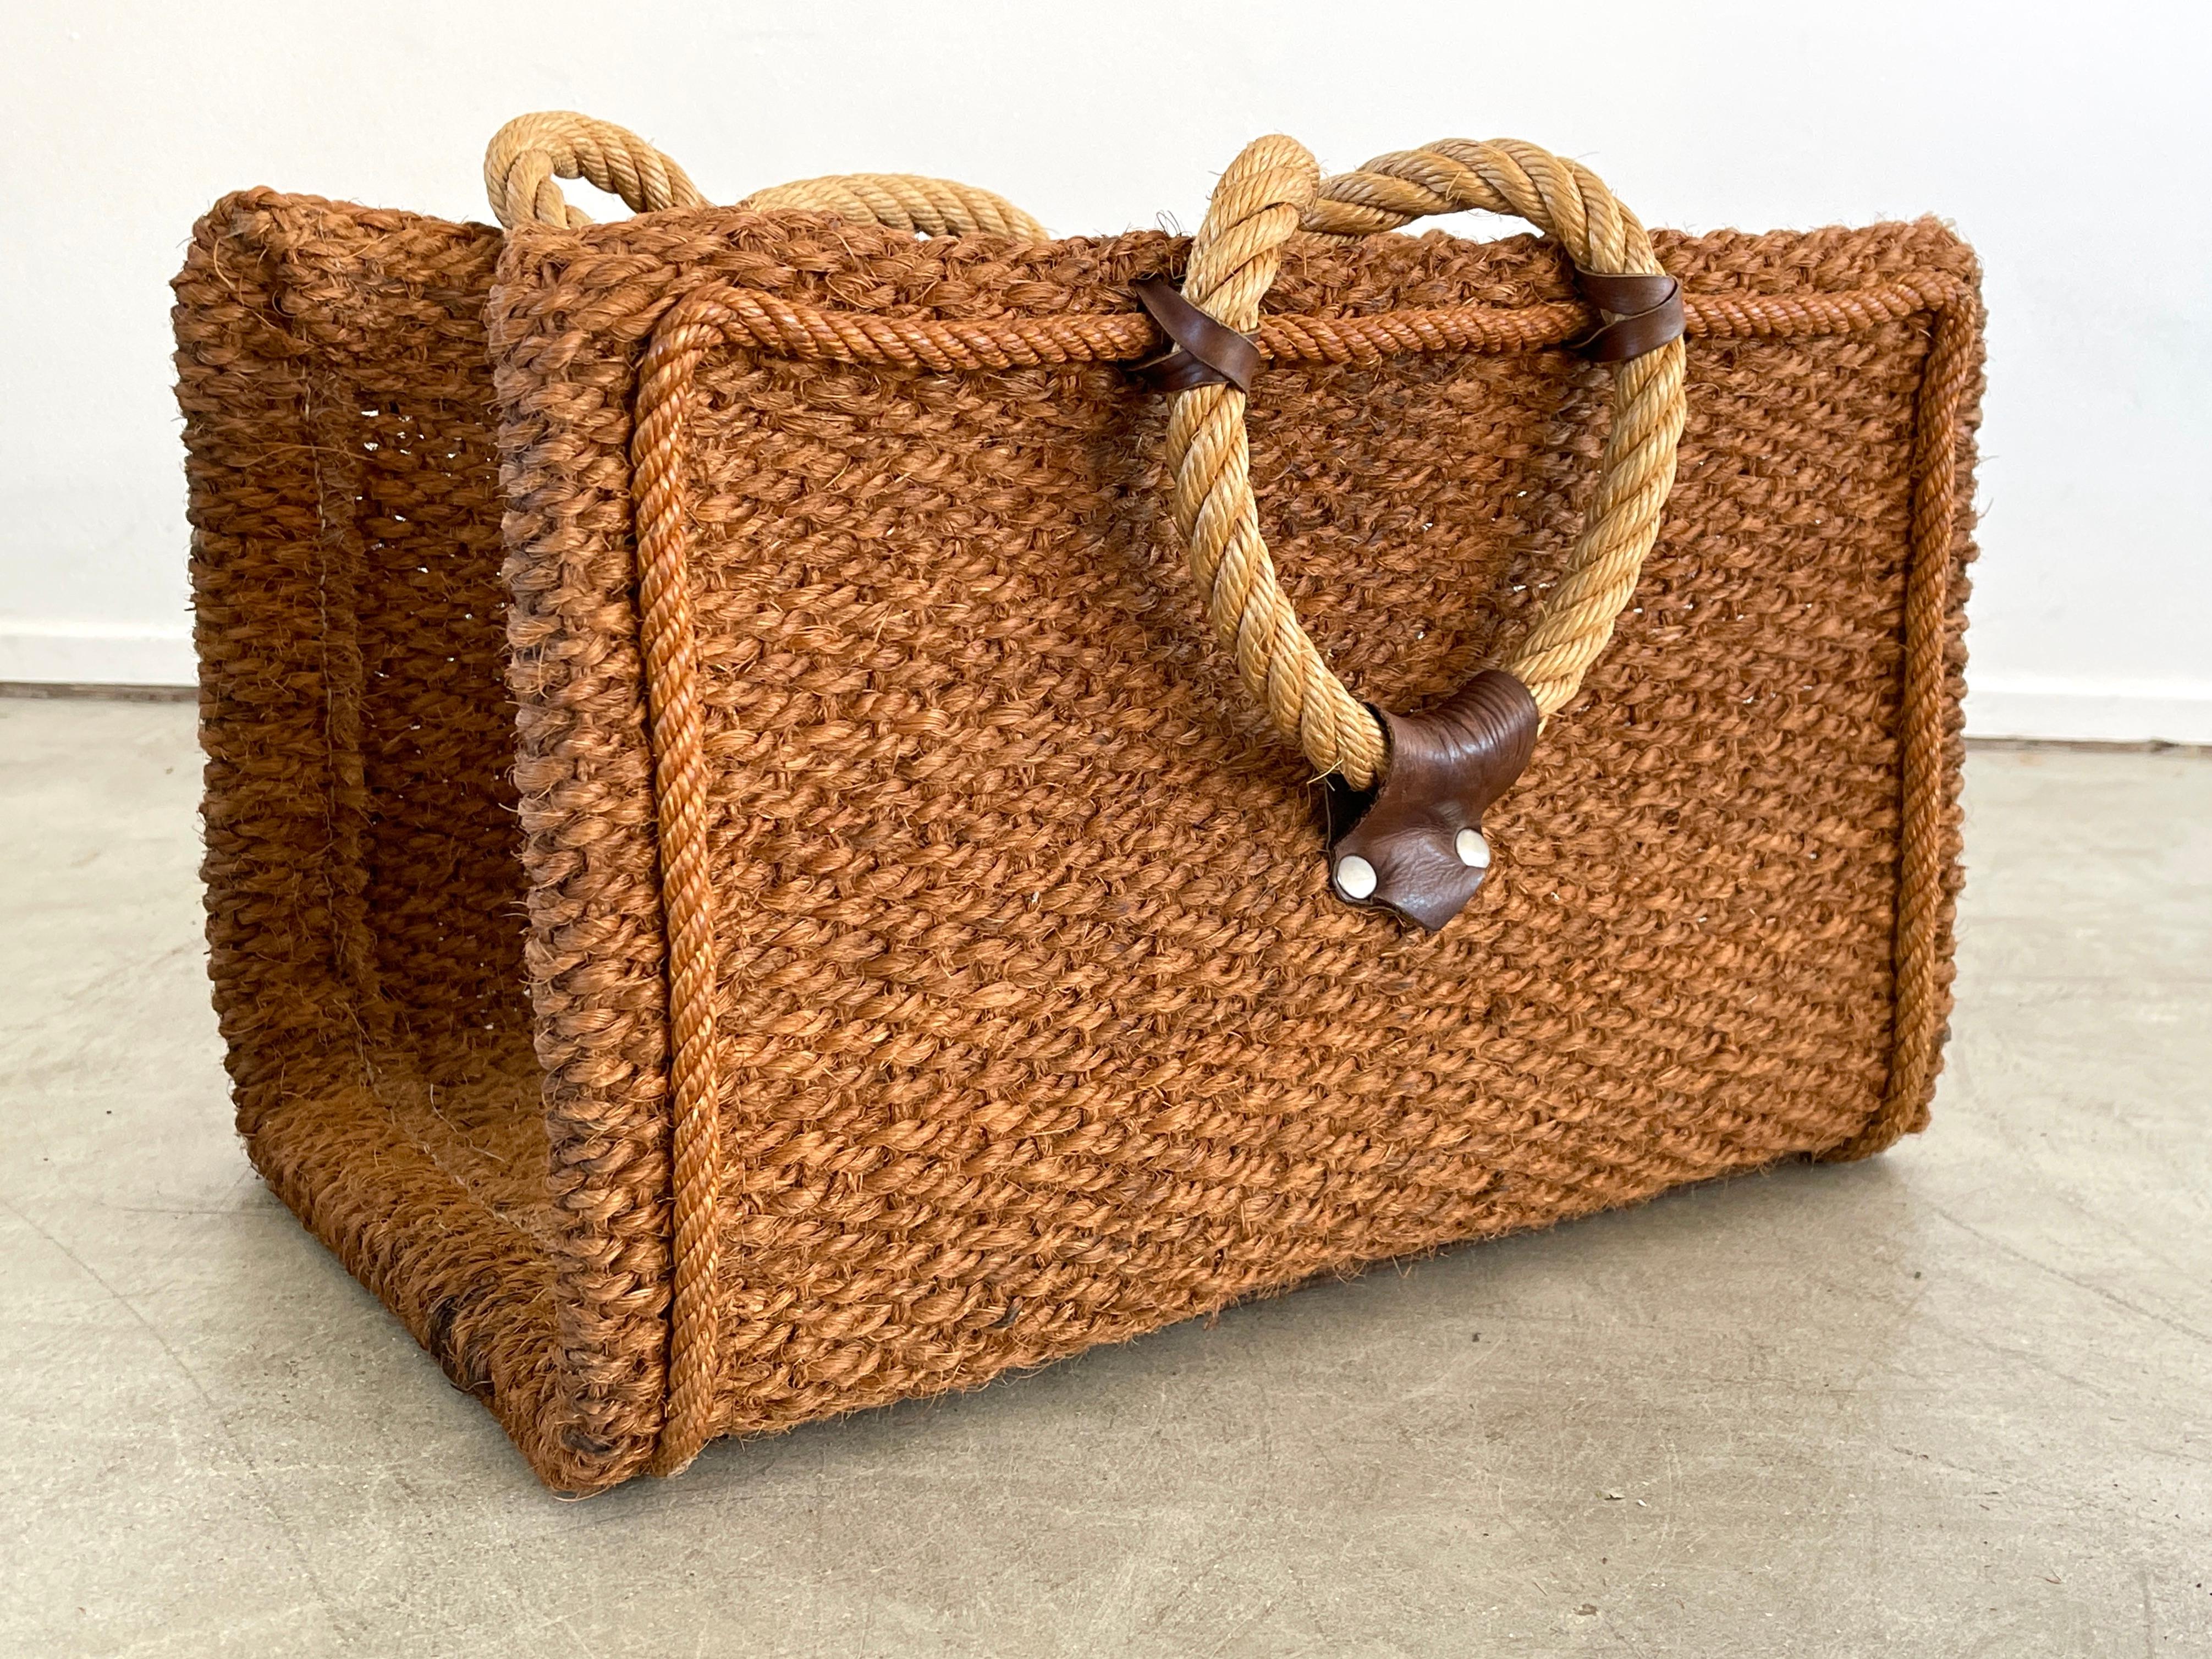 Fantastic large rope floor basket with leather details and rope handle - 
Perfect for magazines, books, blankets or even wood for the fireplace!